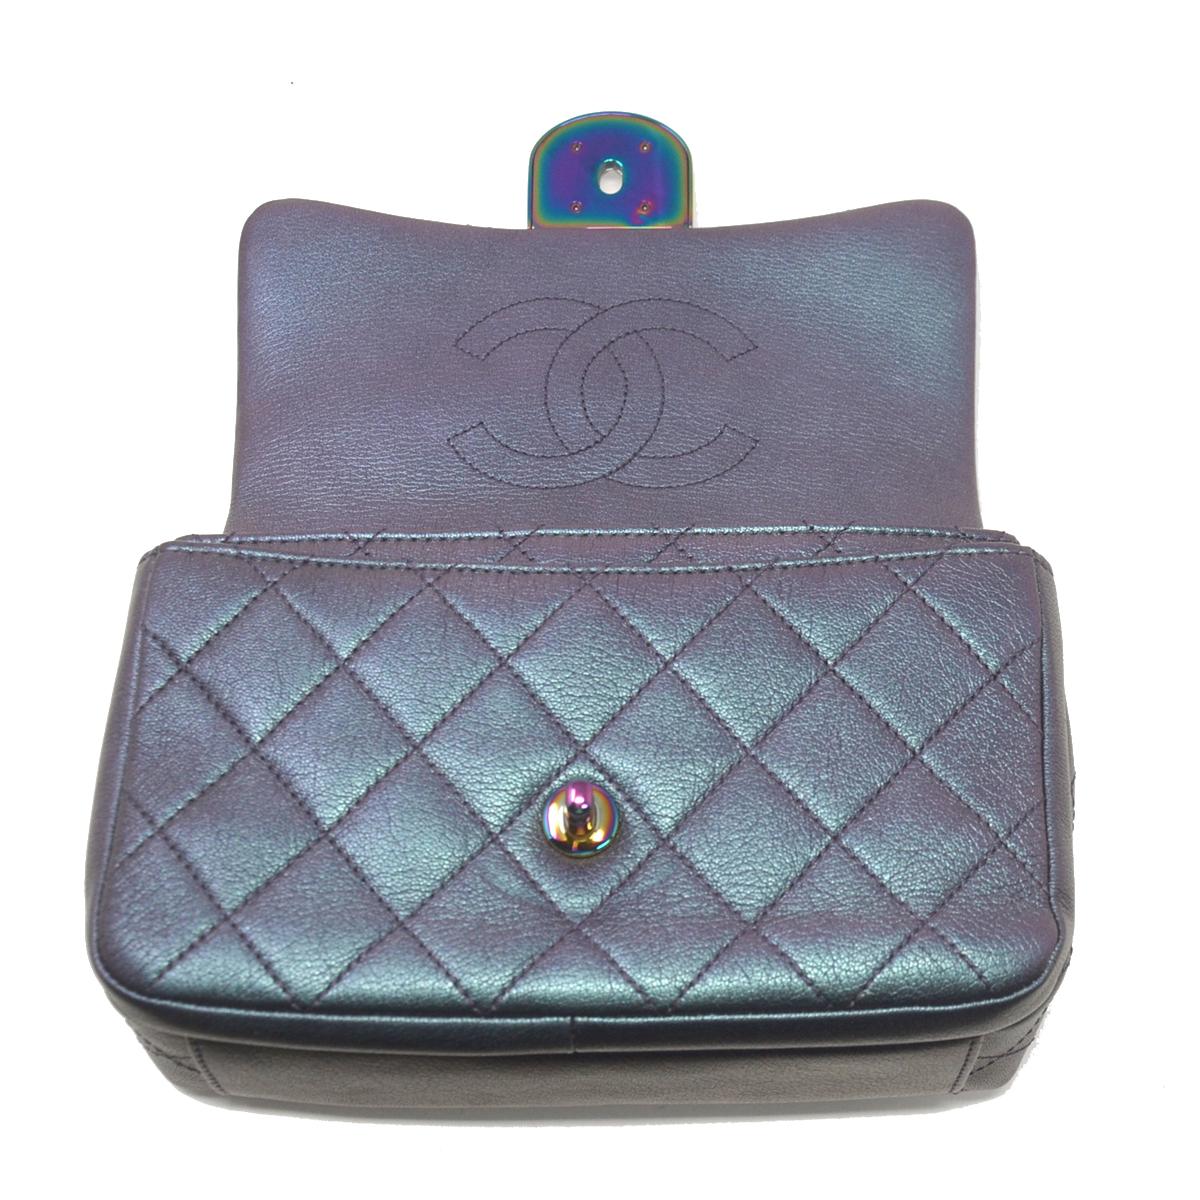 Chanel Iridescent Quilted Small Double Carry Waist Chain Flap Purple Handbag 1